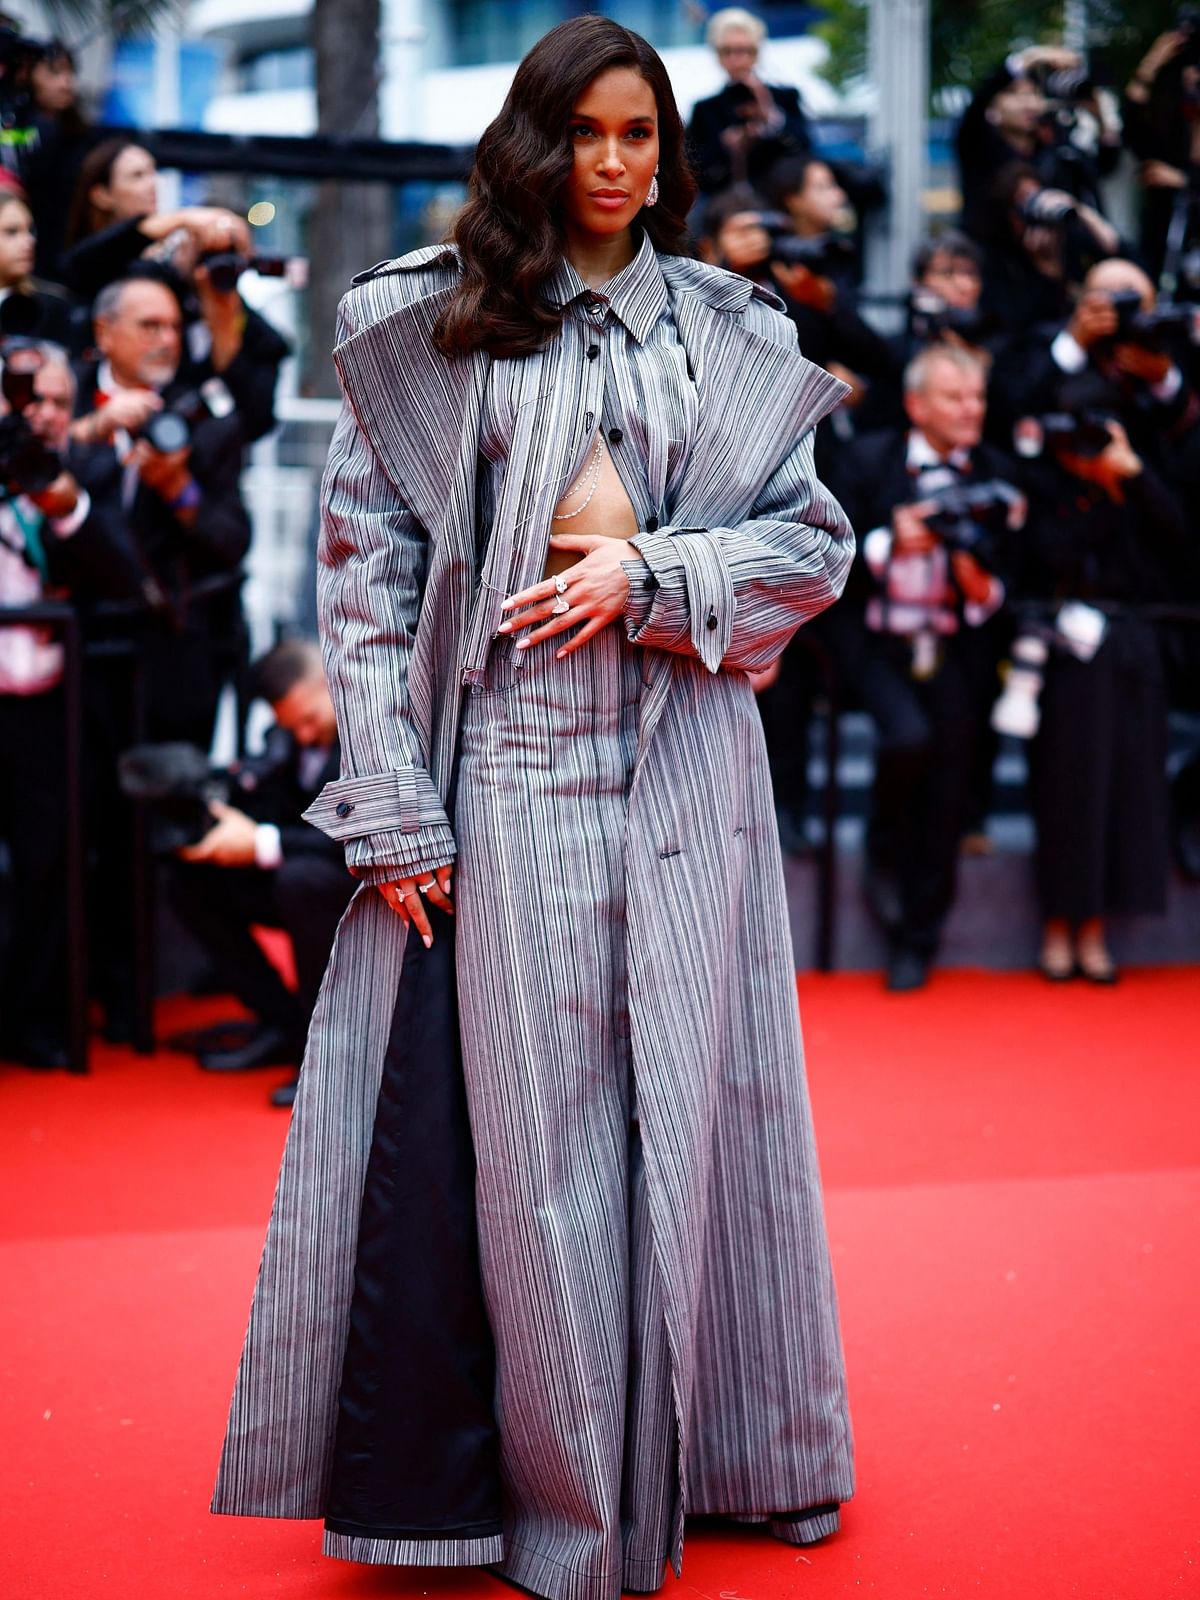 Cindy Bruna was one of the stars who grabbed eyeballs with her striped pants with matching long coat.